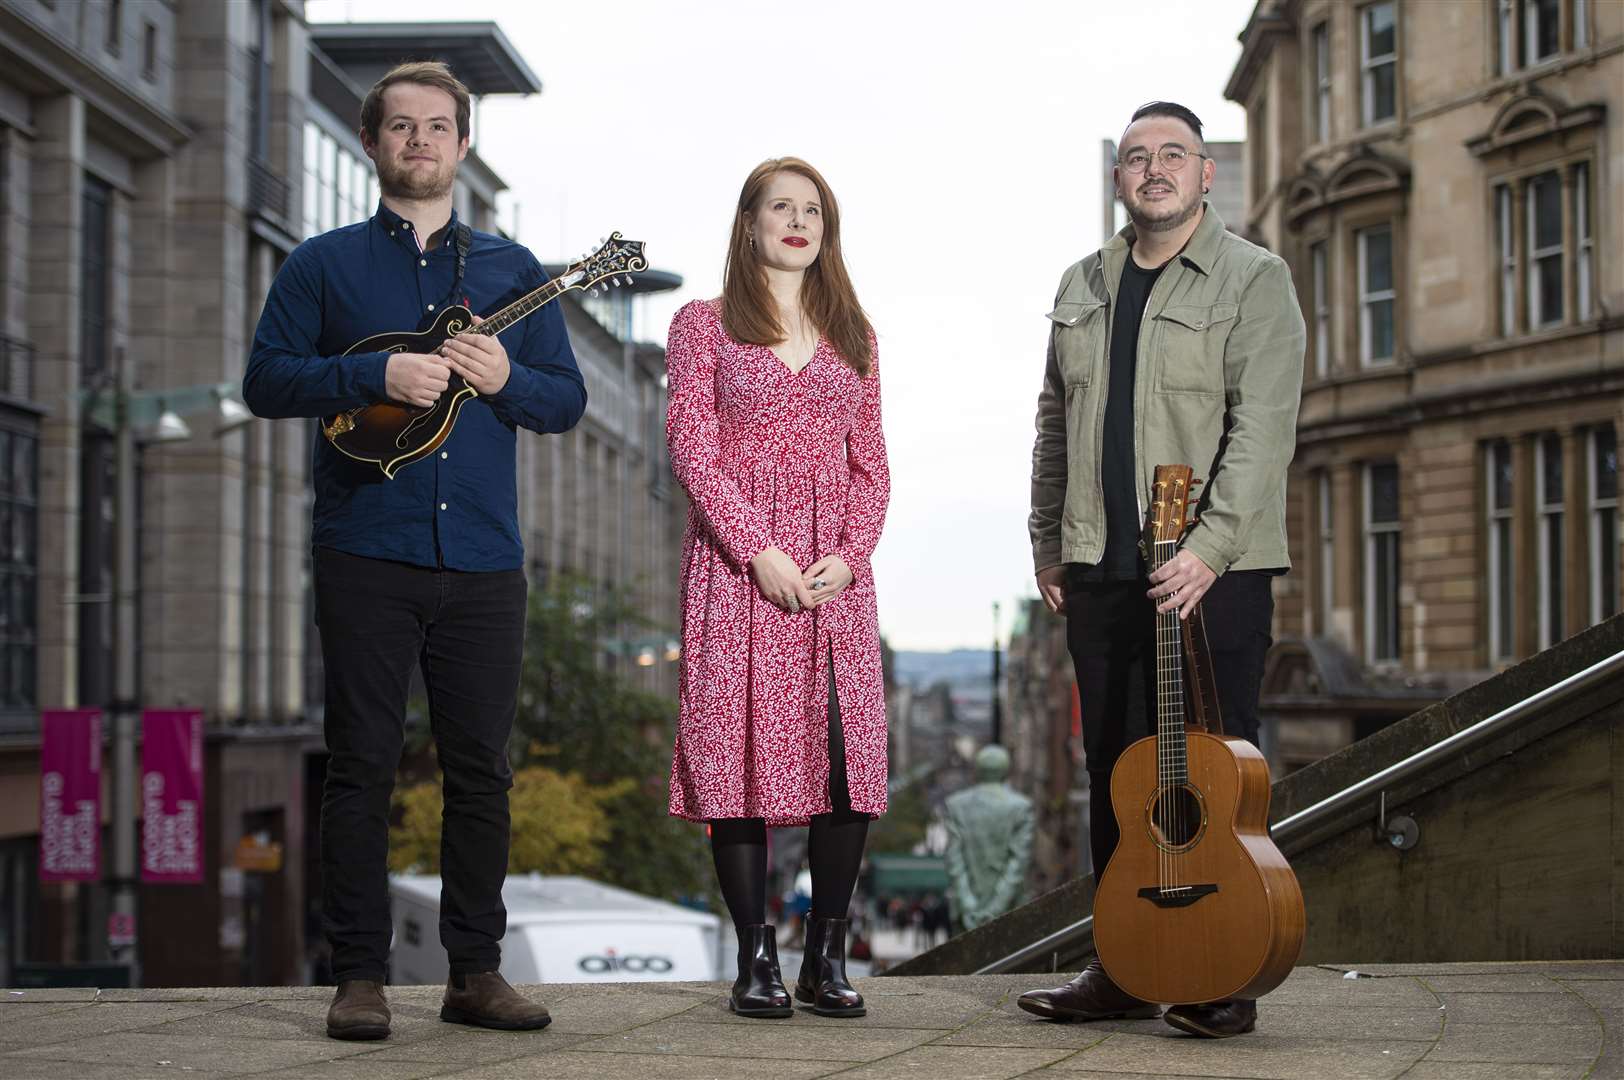 Three musicians who will play Celtic Connections opening night concert 'Neath The Gloamin' Star – Innes White (left), from Dingwall, with Hannah Rarity and Paul McKenna at Glasgow’s Royal Concert Hall to launch the programme.